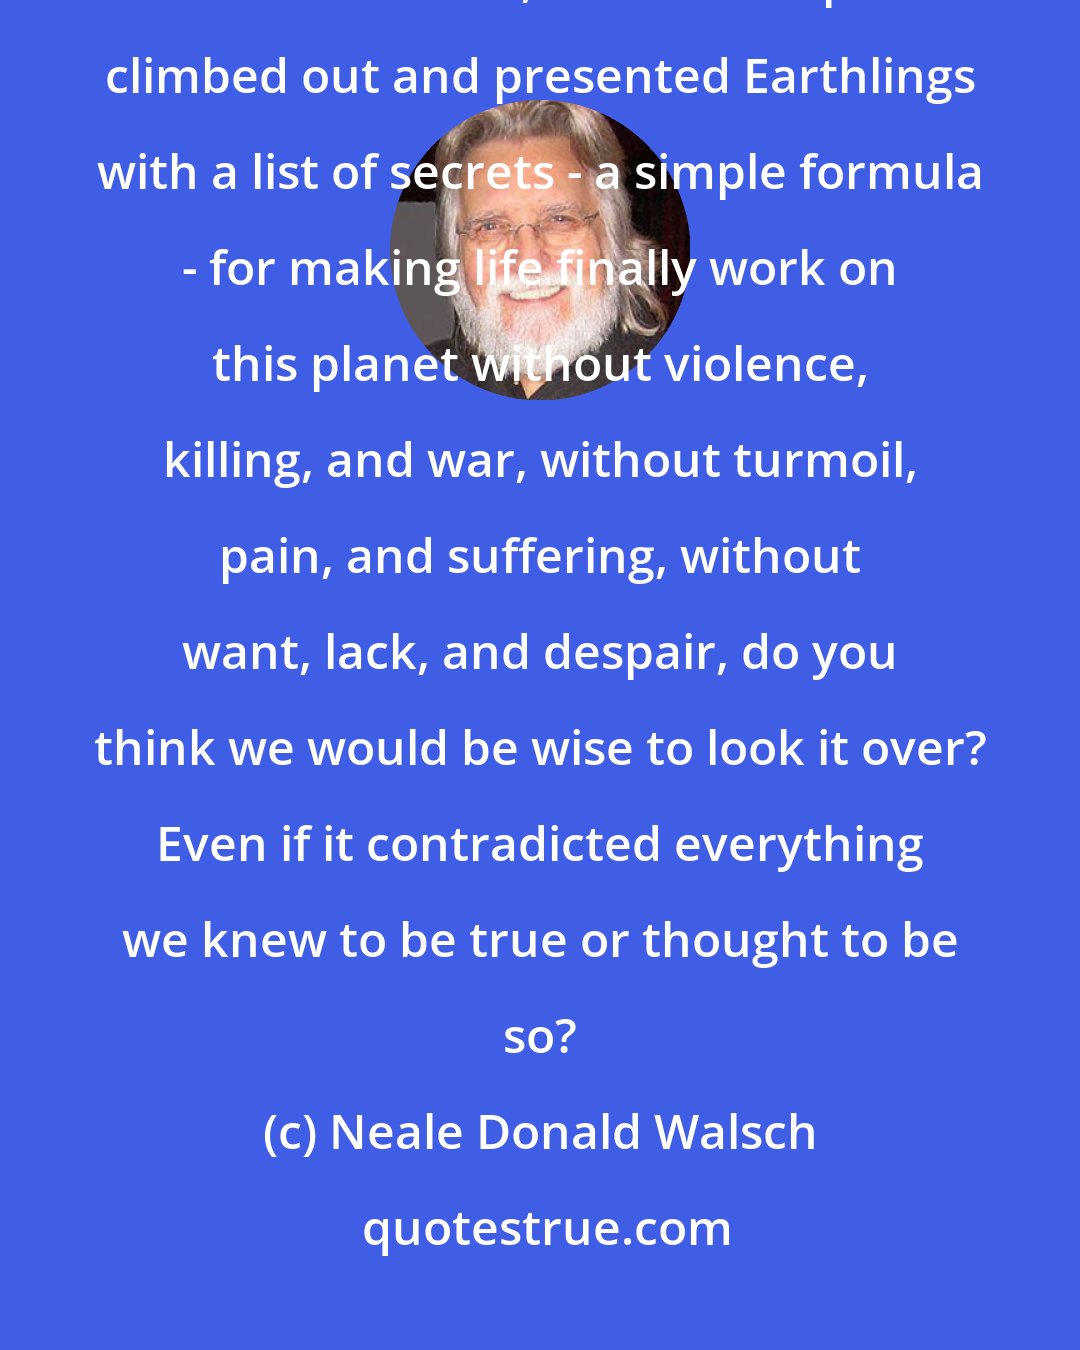 Neale Donald Walsch: If a spaceship from the outer reaches of the galaxy landed on Earth in the next two months, and its occupants climbed out and presented Earthlings with a list of secrets - a simple formula - for making life finally work on this planet without violence, killing, and war, without turmoil, pain, and suffering, without want, lack, and despair, do you think we would be wise to look it over? Even if it contradicted everything we knew to be true or thought to be so?